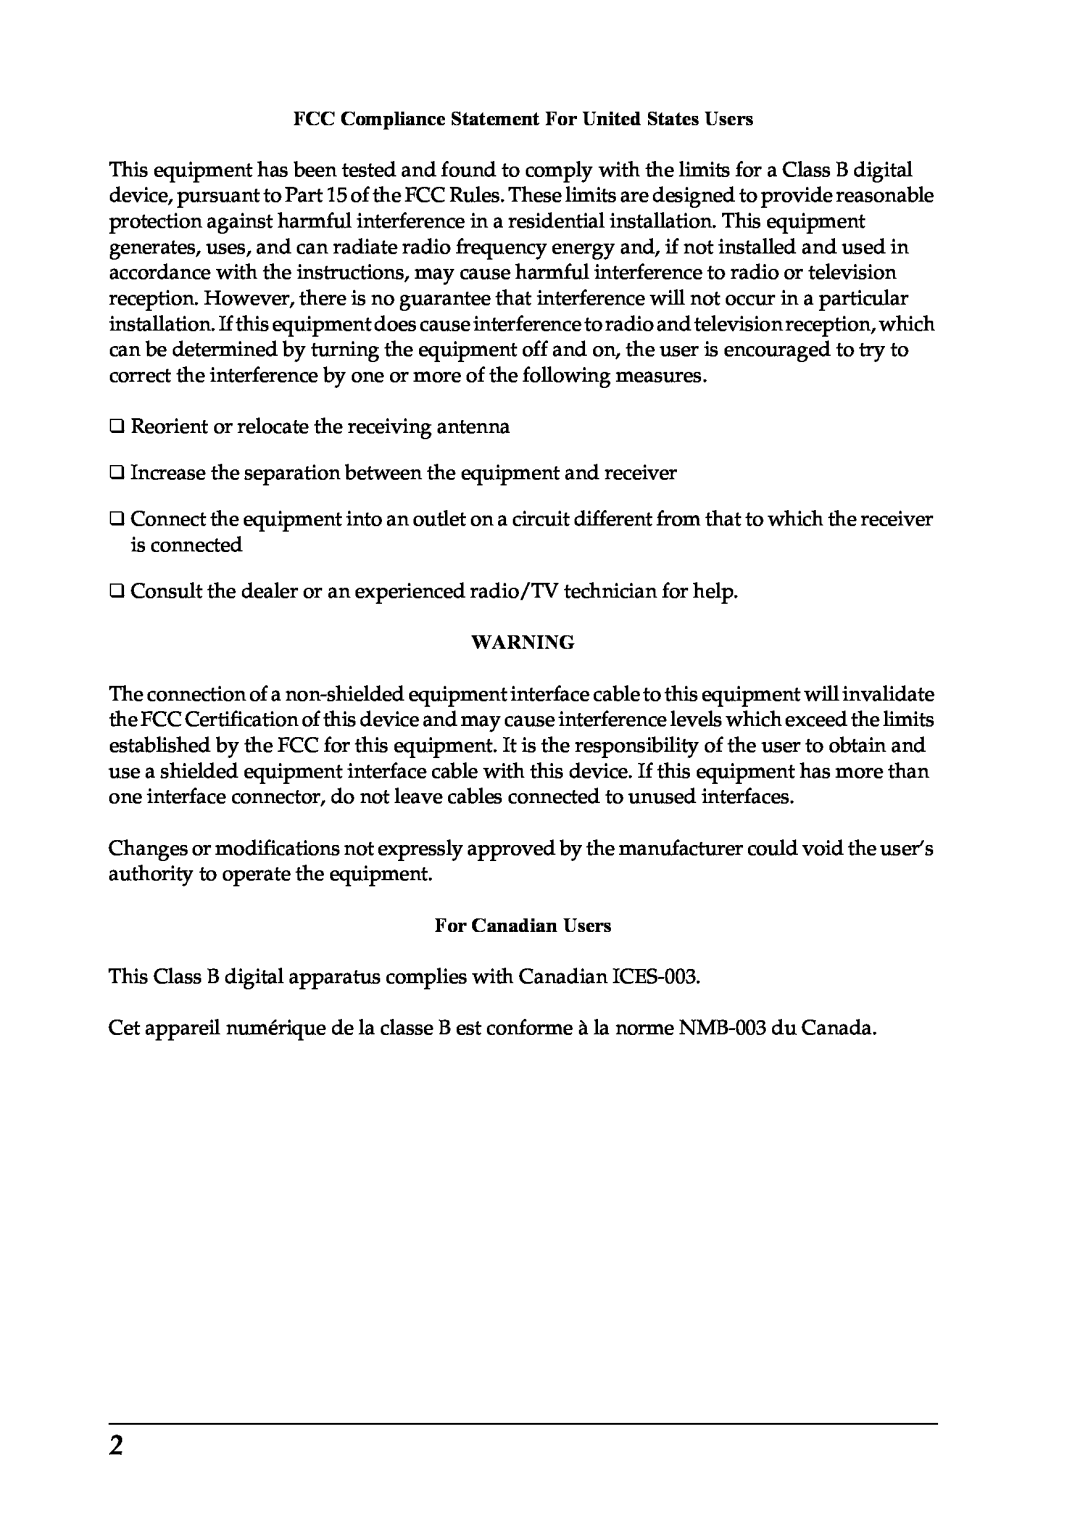 Epson LX-1170 manual FCC Compliance Statement For United States Users, For Canadian Users 